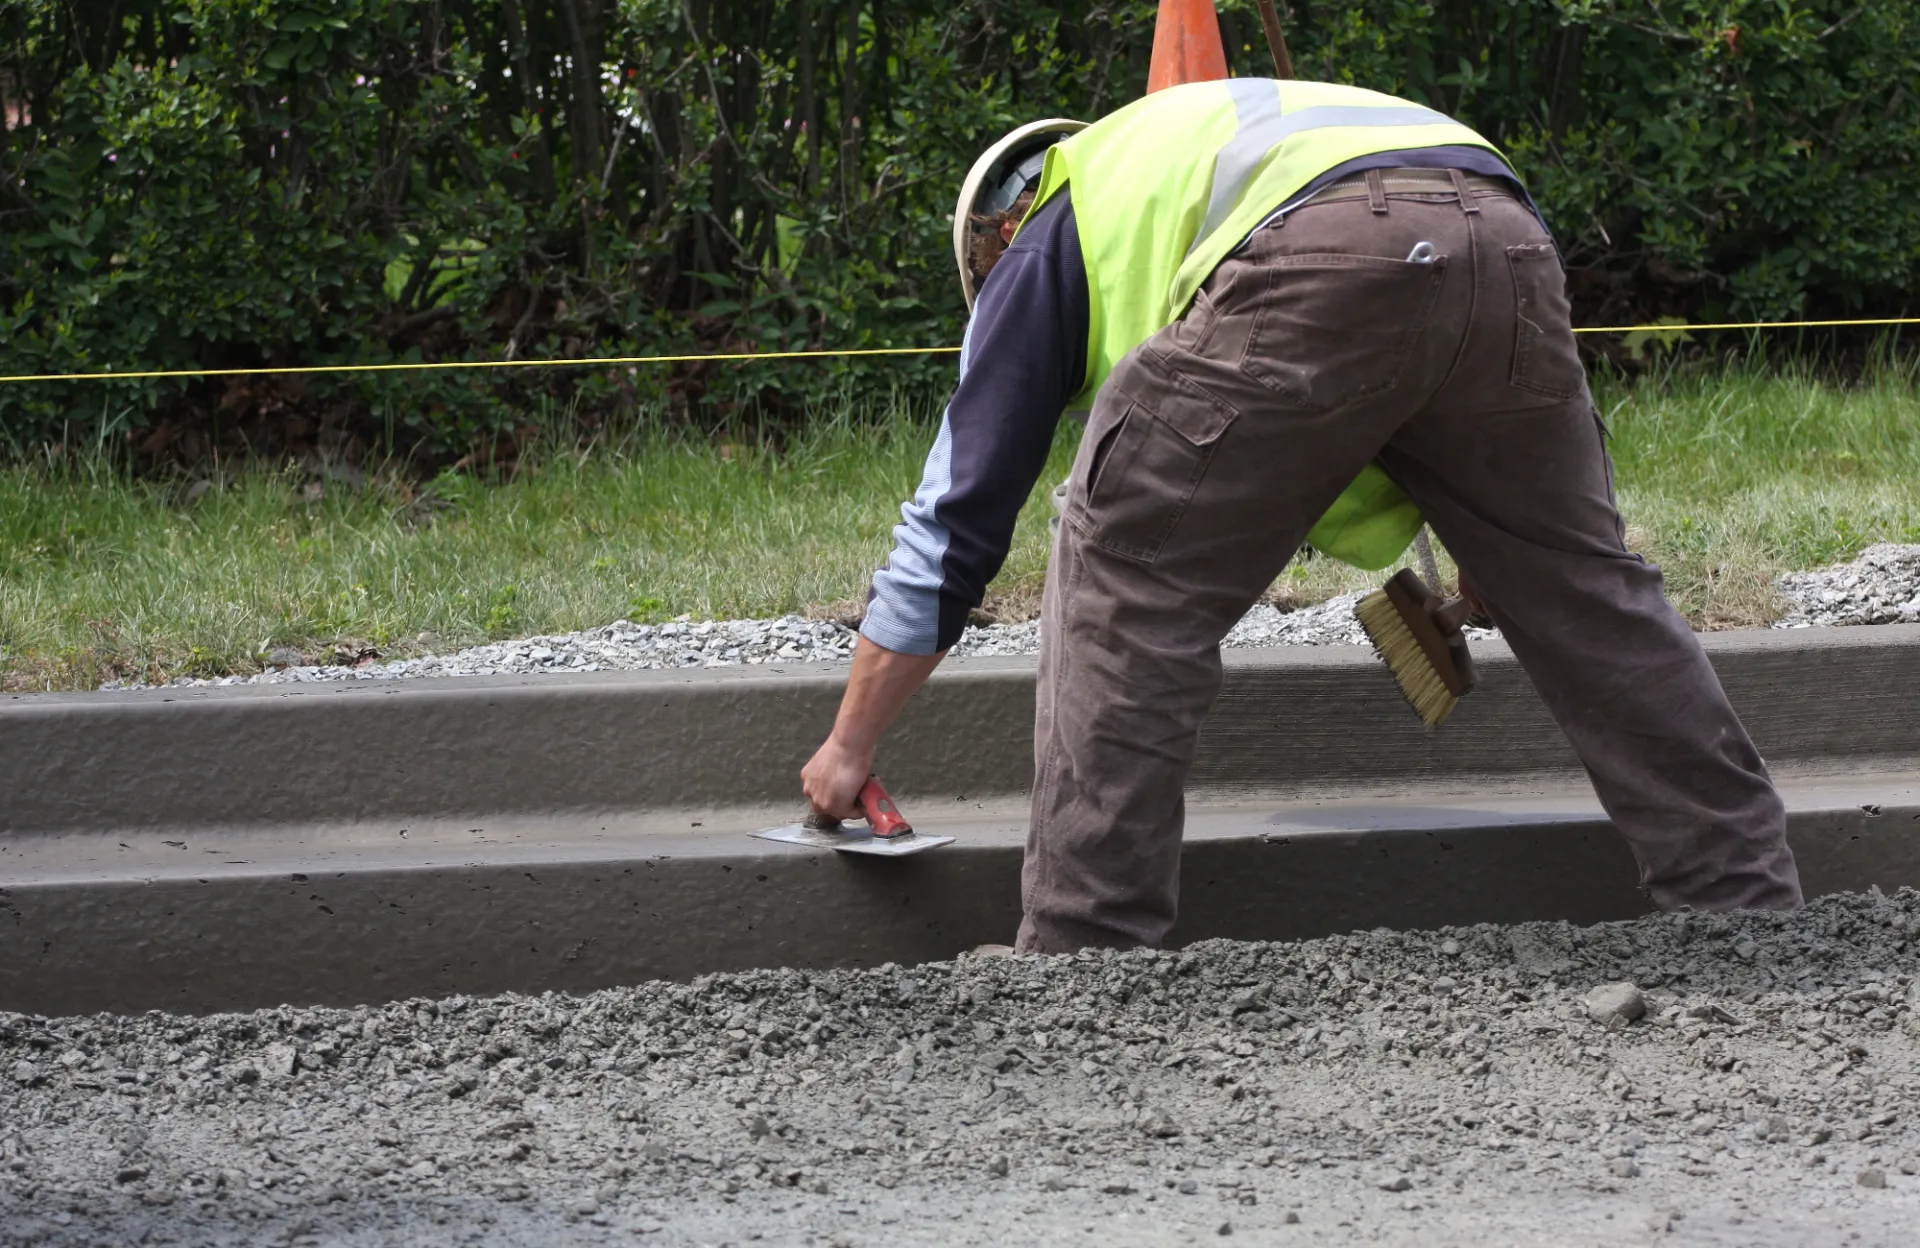 A construction worker from Dade Decorative Concrete in Coral Gables, FL, wearing a high-visibility vest and a hard hat, smooths out wet concrete on a sidewalk using a trowel. The worker is bent over, concentrating on their task. There are trees and a grassy area in the background, ideal for decorative concrete projects.